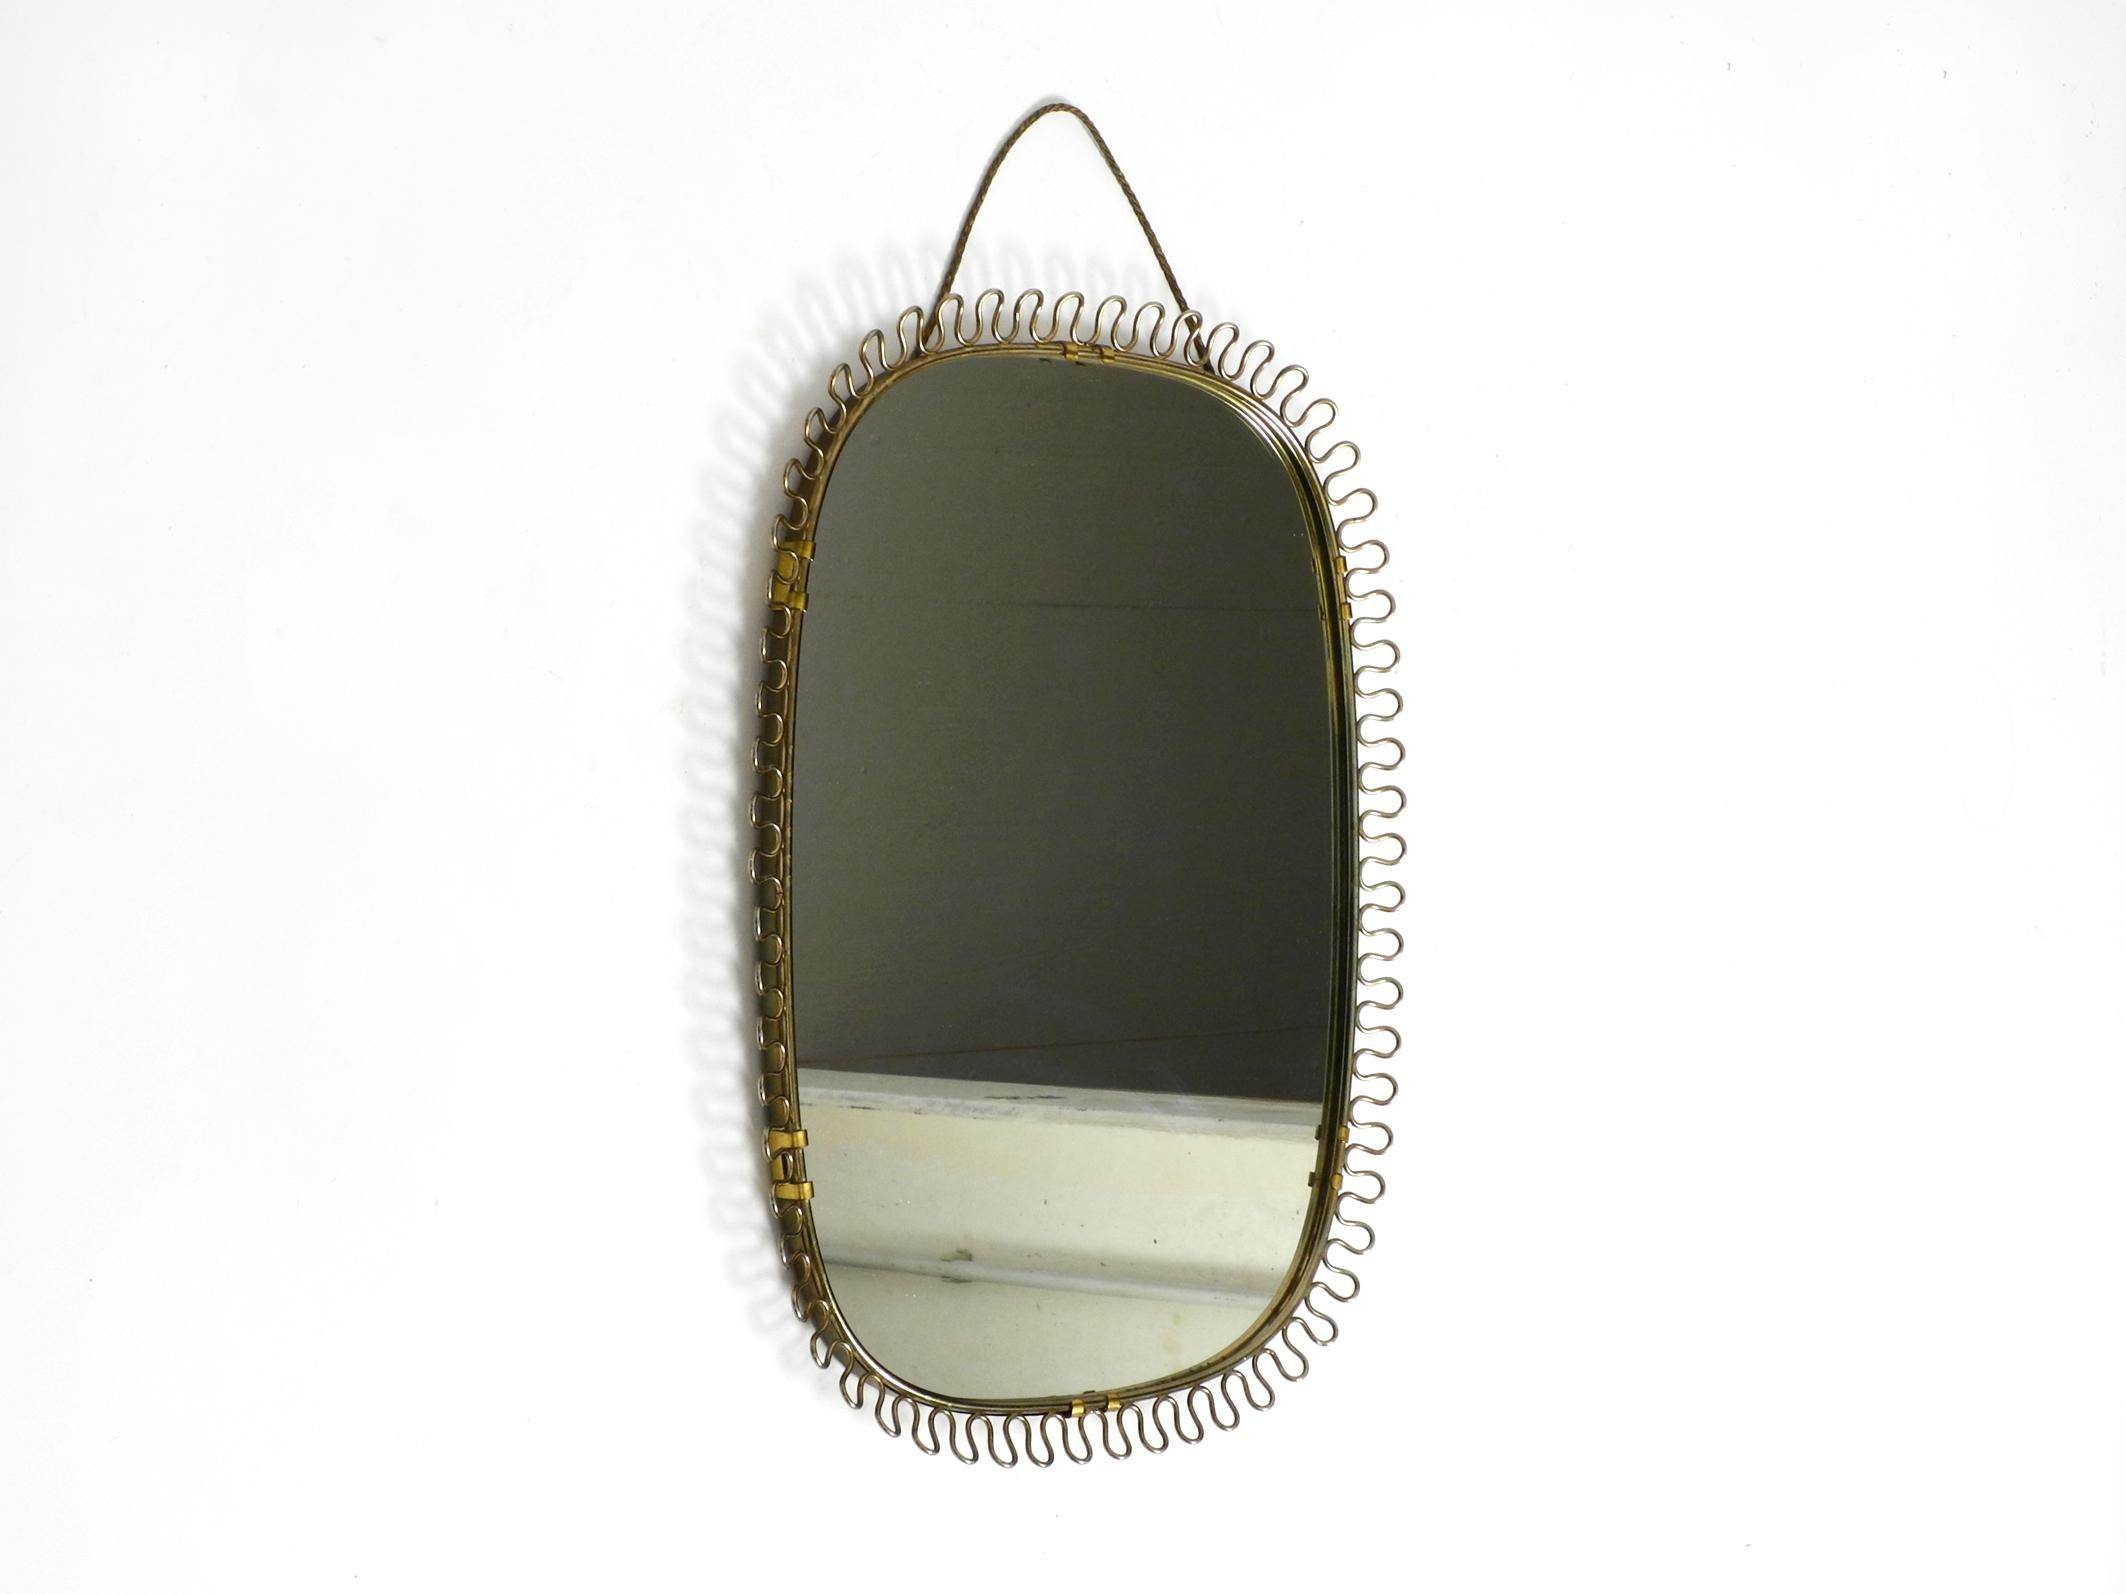 Beautiful small heavy original Mid Century metal wall mirror.
Frame is made of heavy metal in brass color with a great design with loops.
Heavy and solidly built, with original hanging rope in gold.
No damage to the entire mirror.
Light patina and